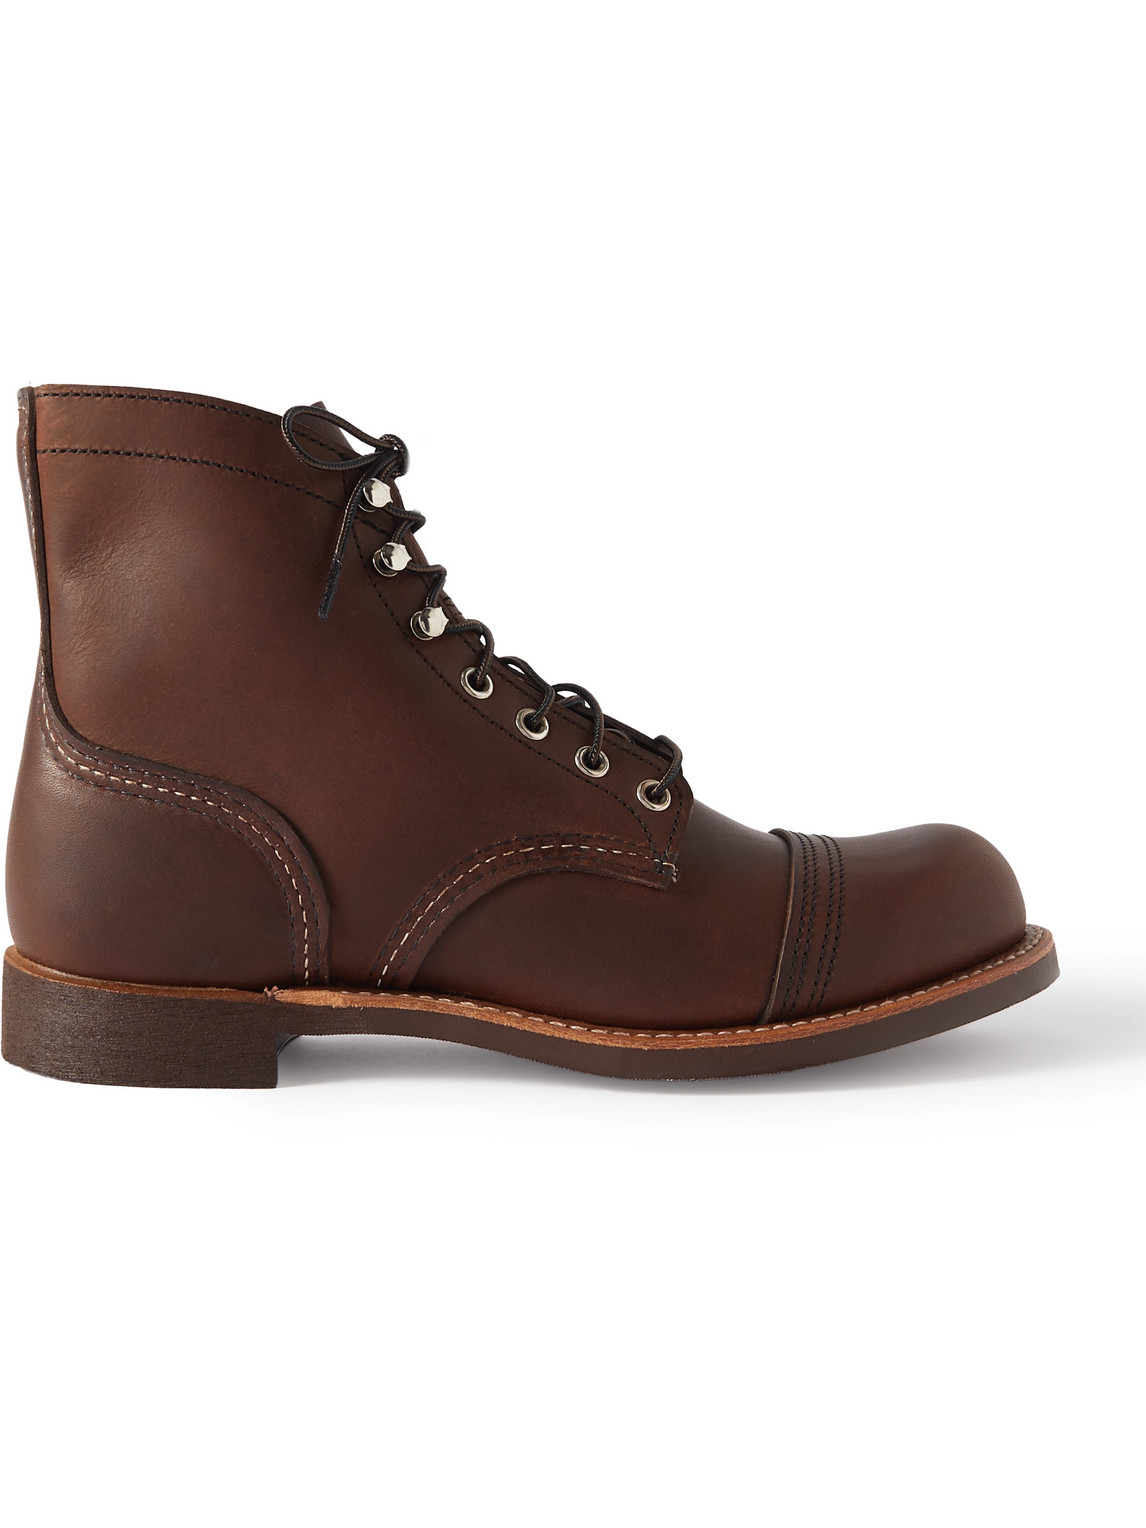 8085 Iron Ranger Leather Boots